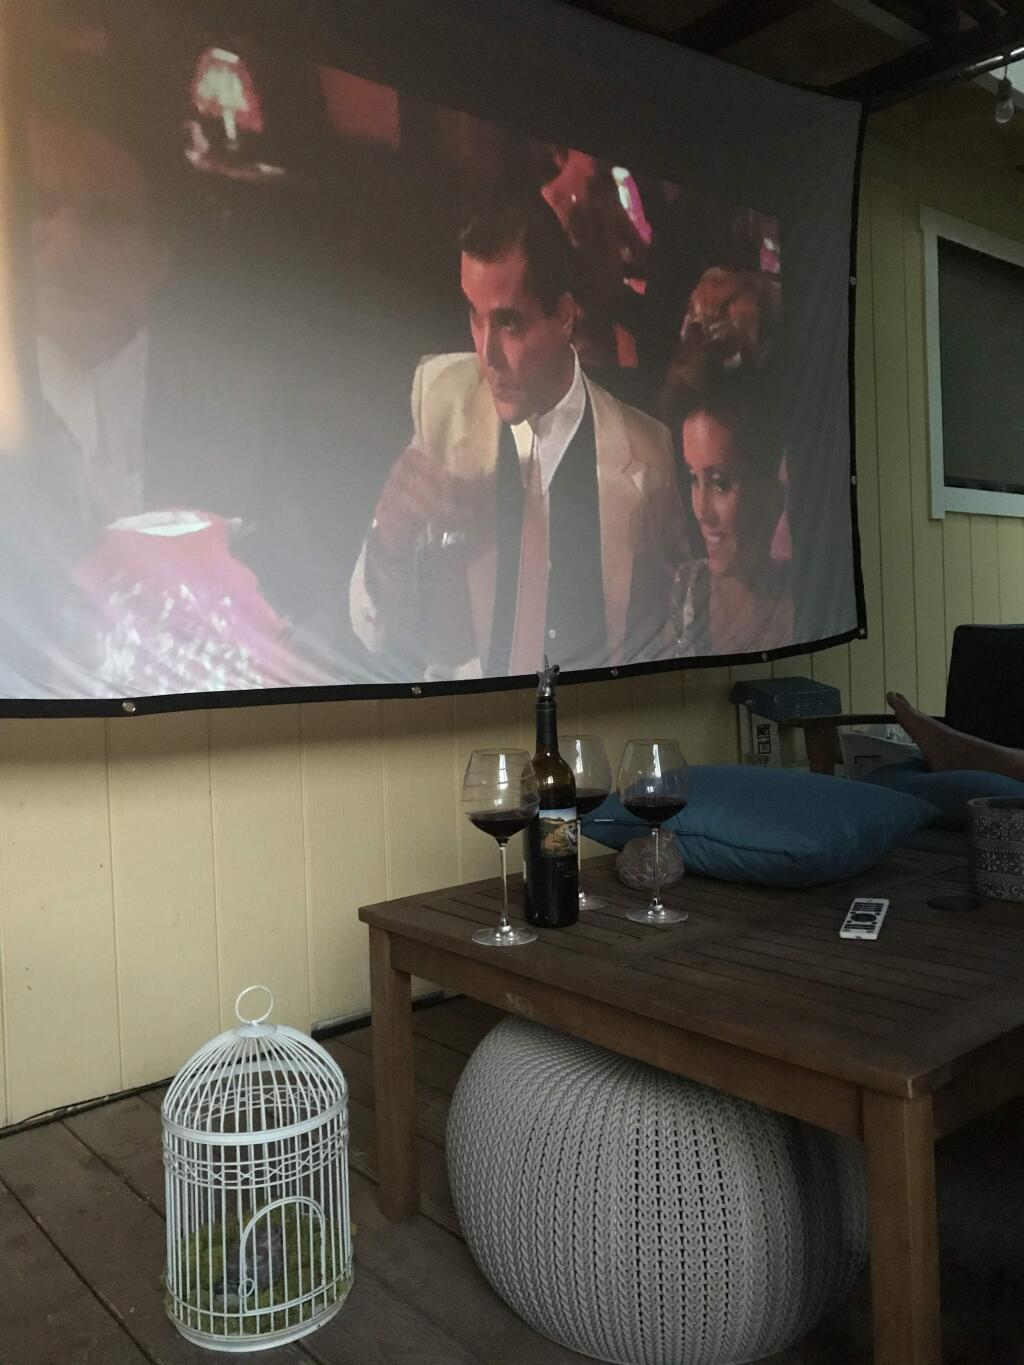 The Alexander Valley Film Festival has been hosting weekly online film screenings, including a recent showing of 'Goodfellas,' in response to shutdowns caused by the coronavirus pandemic. ALEXANDER VALLEY FILM SOCIETY